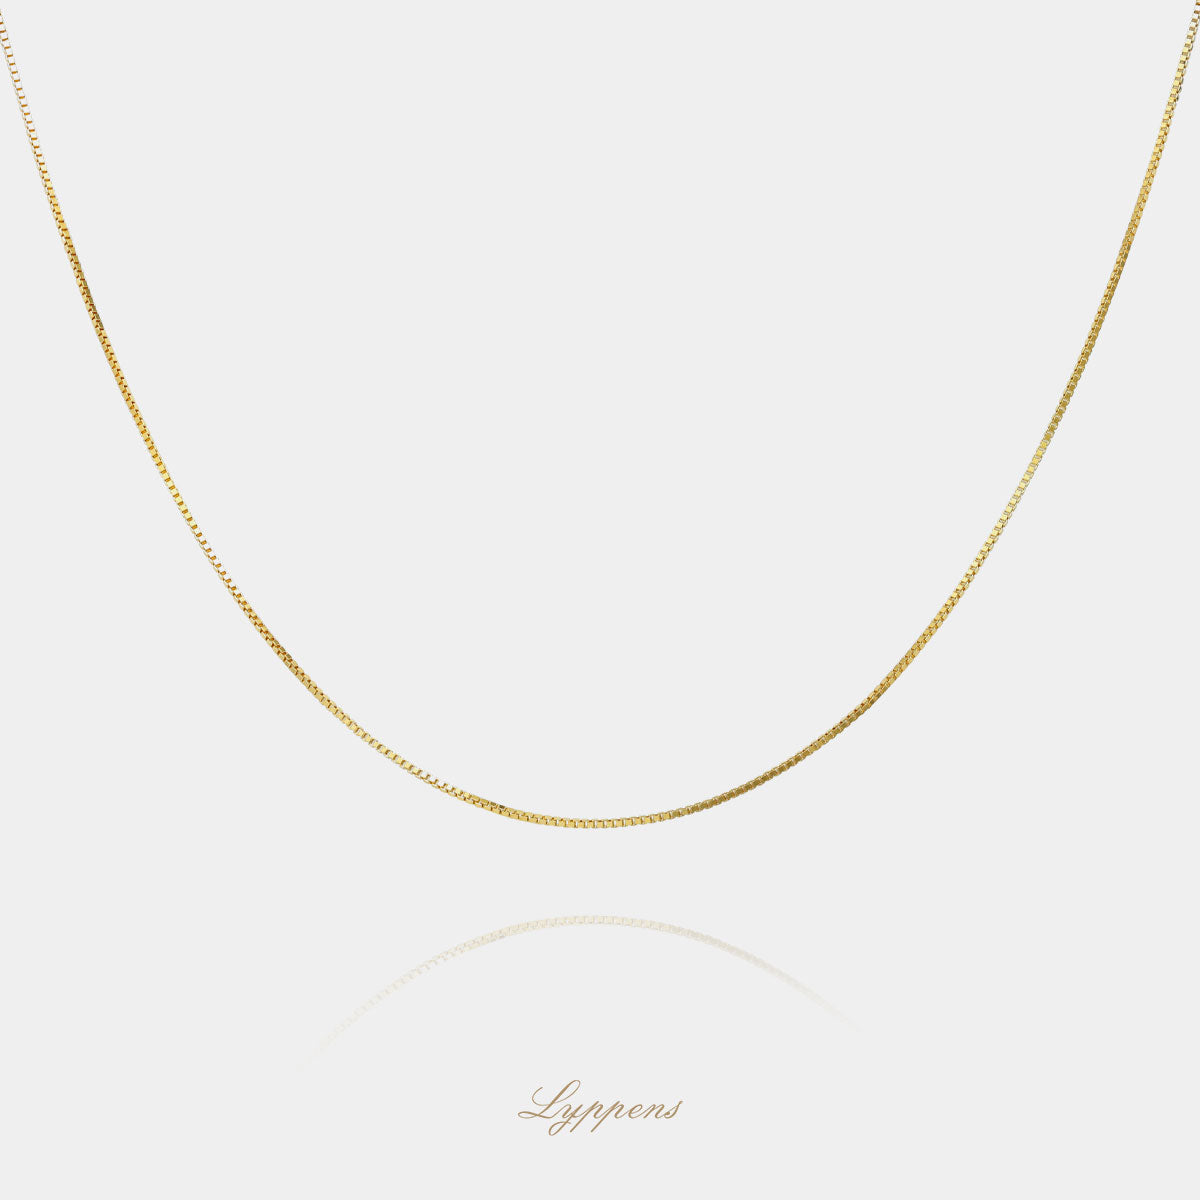 Yellow gold venetian link necklace